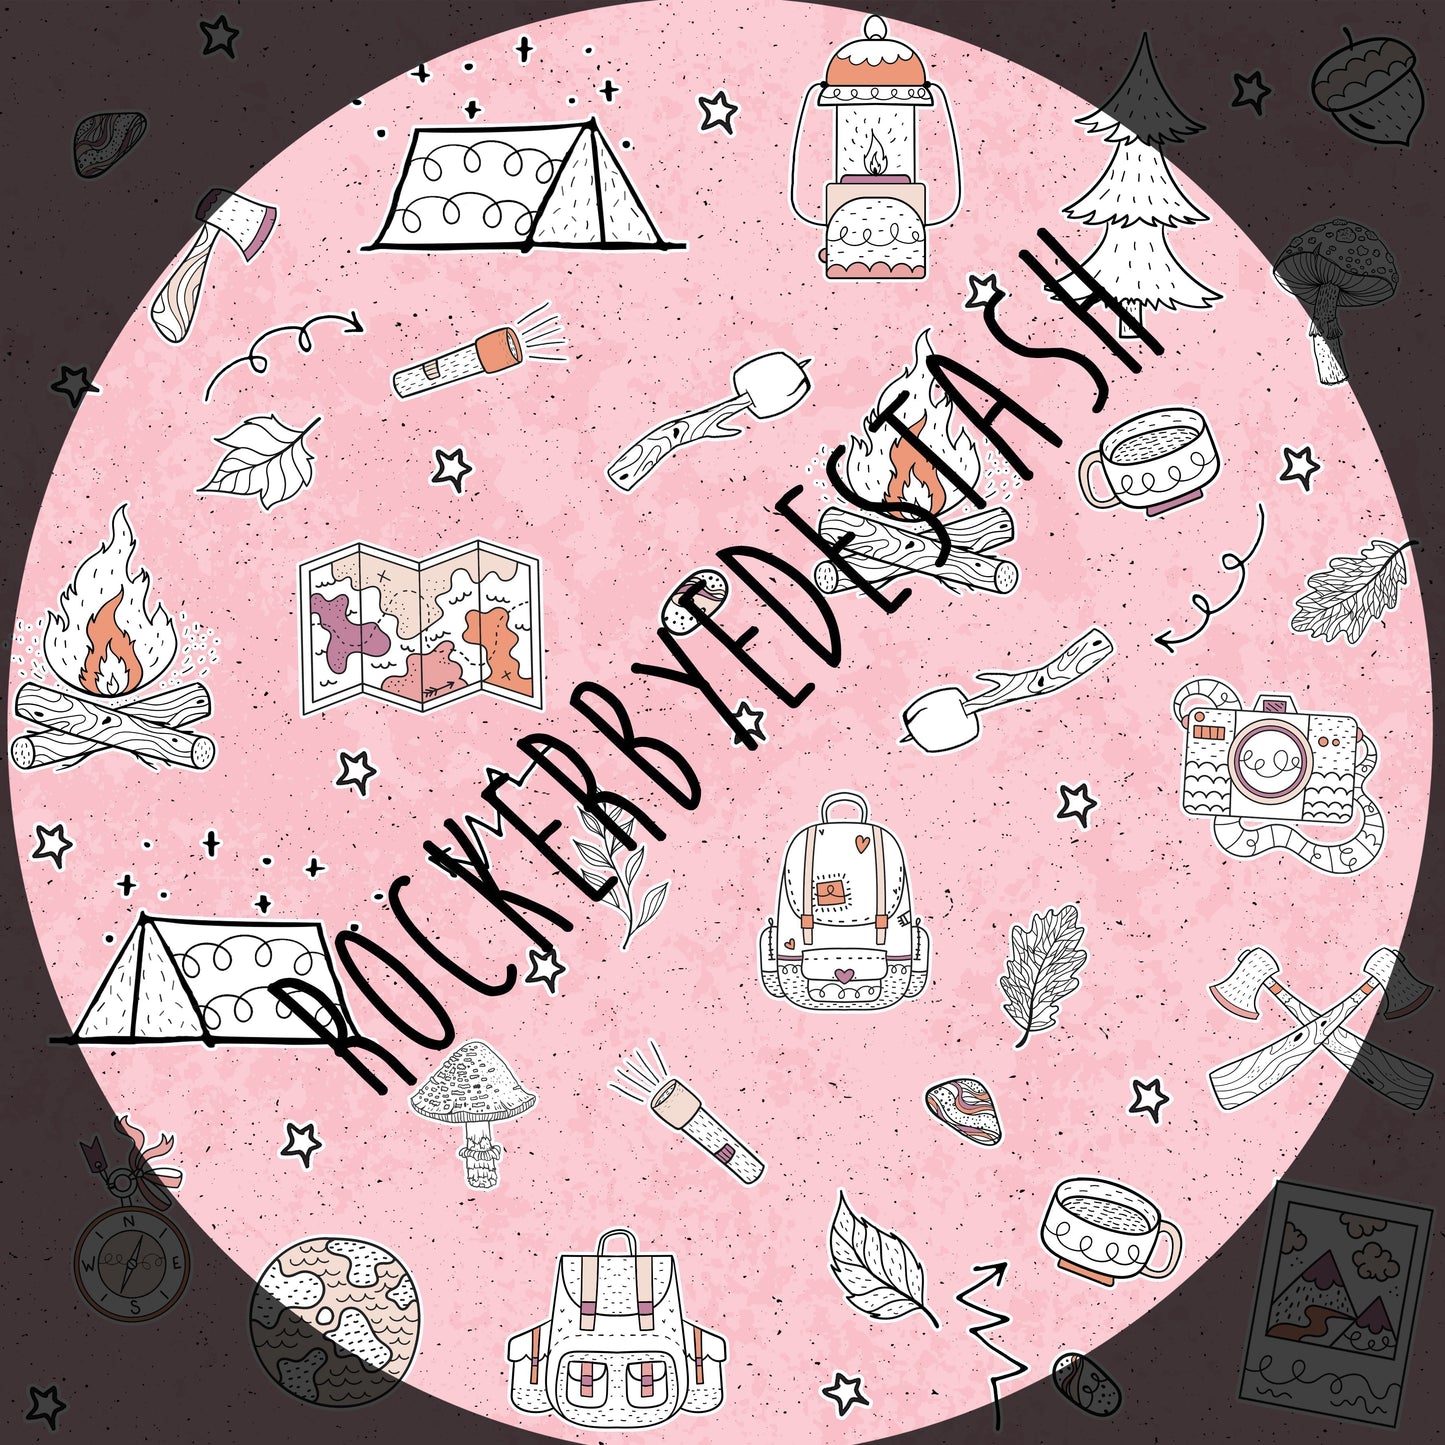 Vinyl - Round RR Fabric - Retail - Travel & Camping - all designs listed here